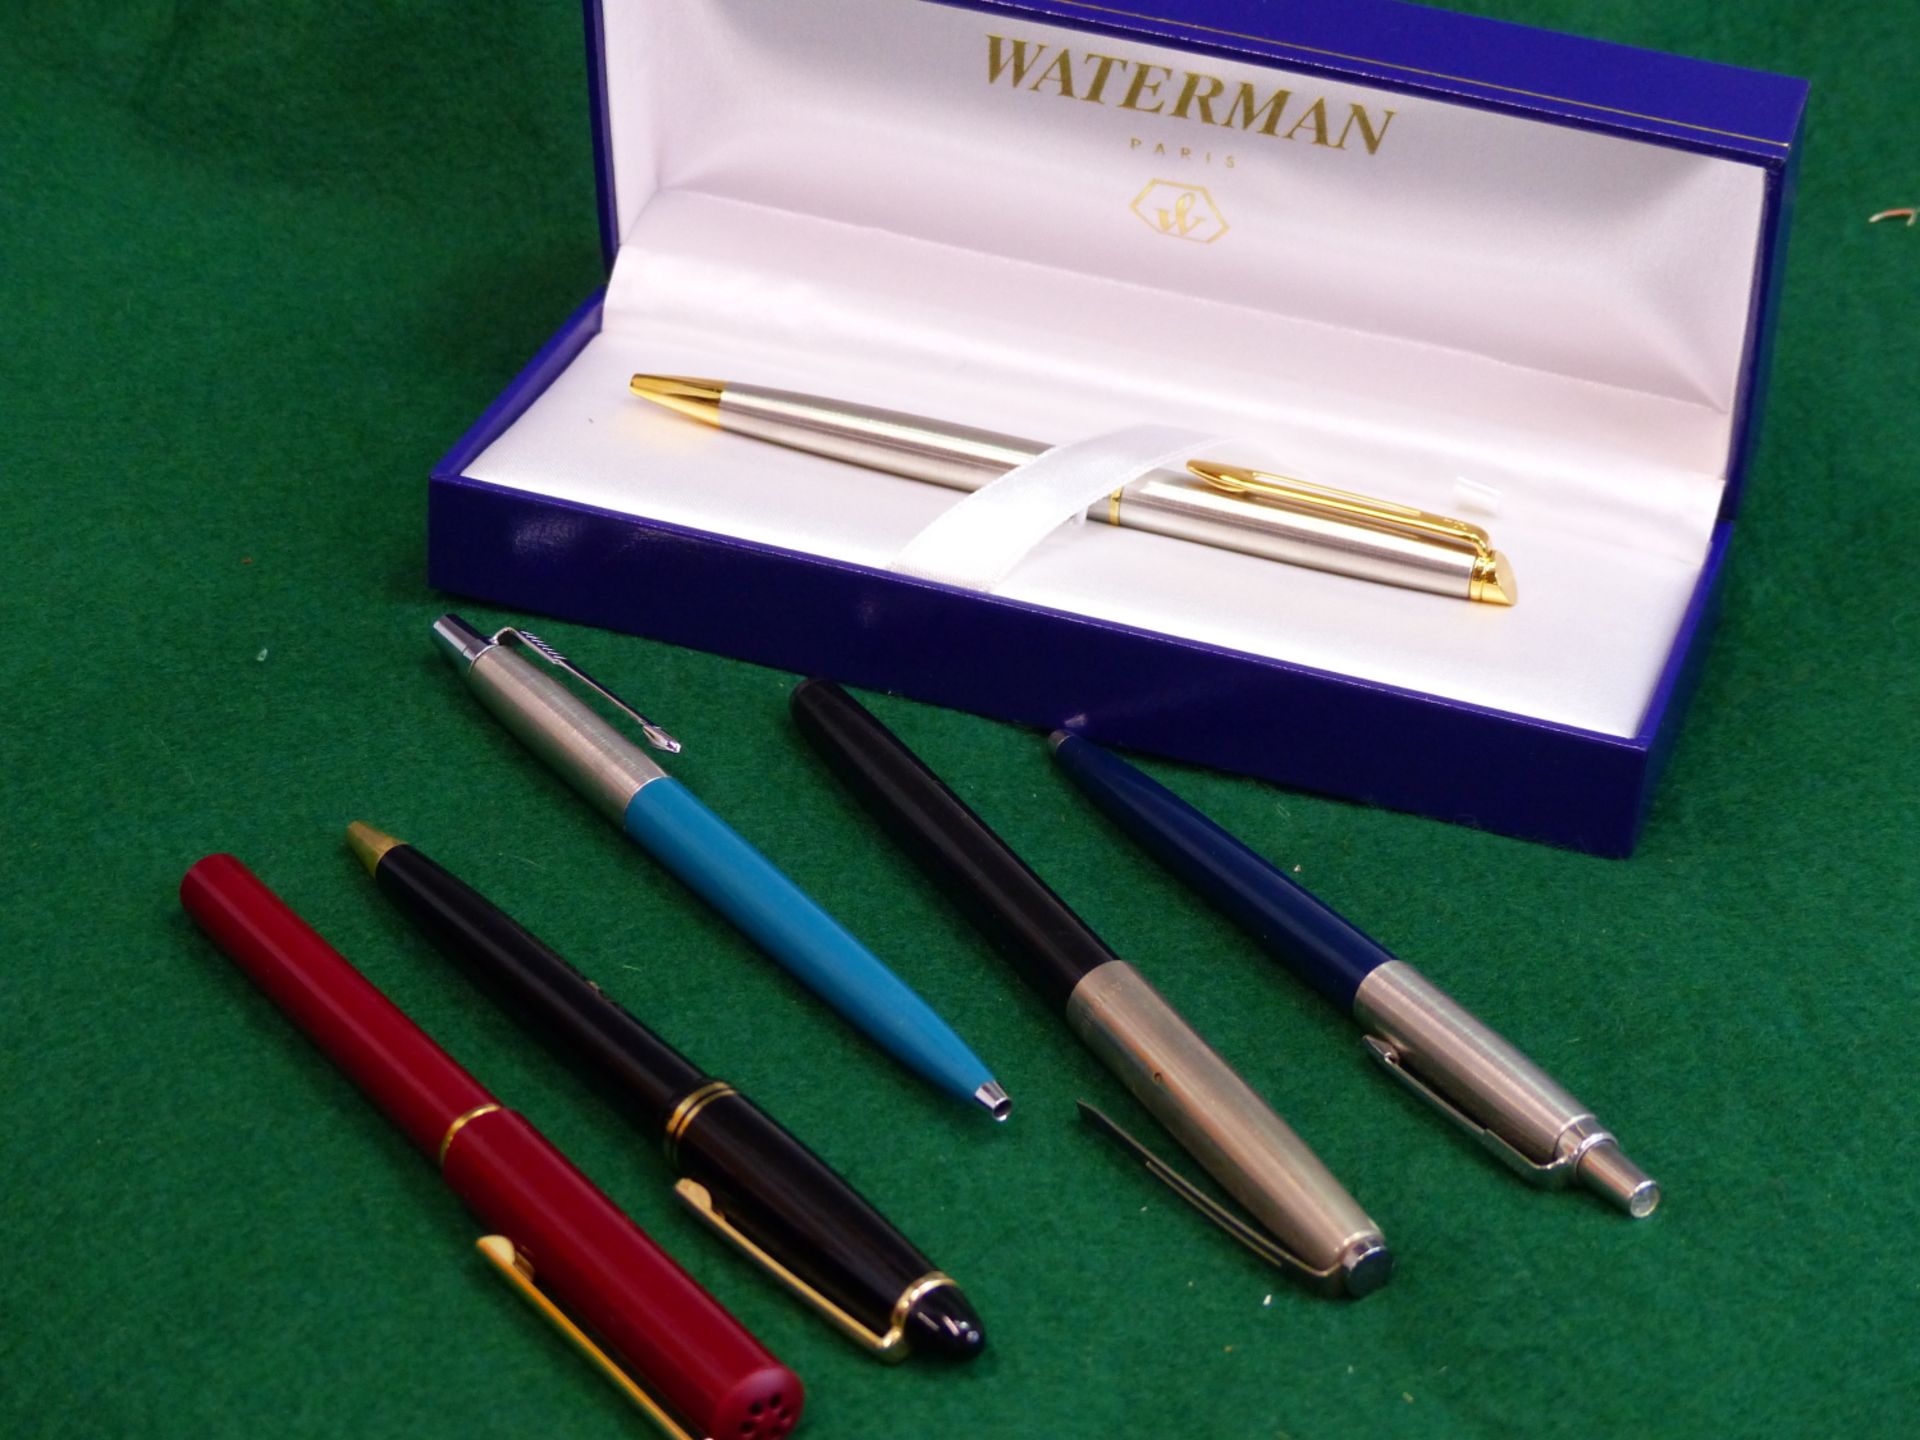 A WATERMANS ROLLER BALL PEN IN ORIGINAL PRESENTATION BOX TOGETHER WITH TWO PARKER EXAMPLES, A